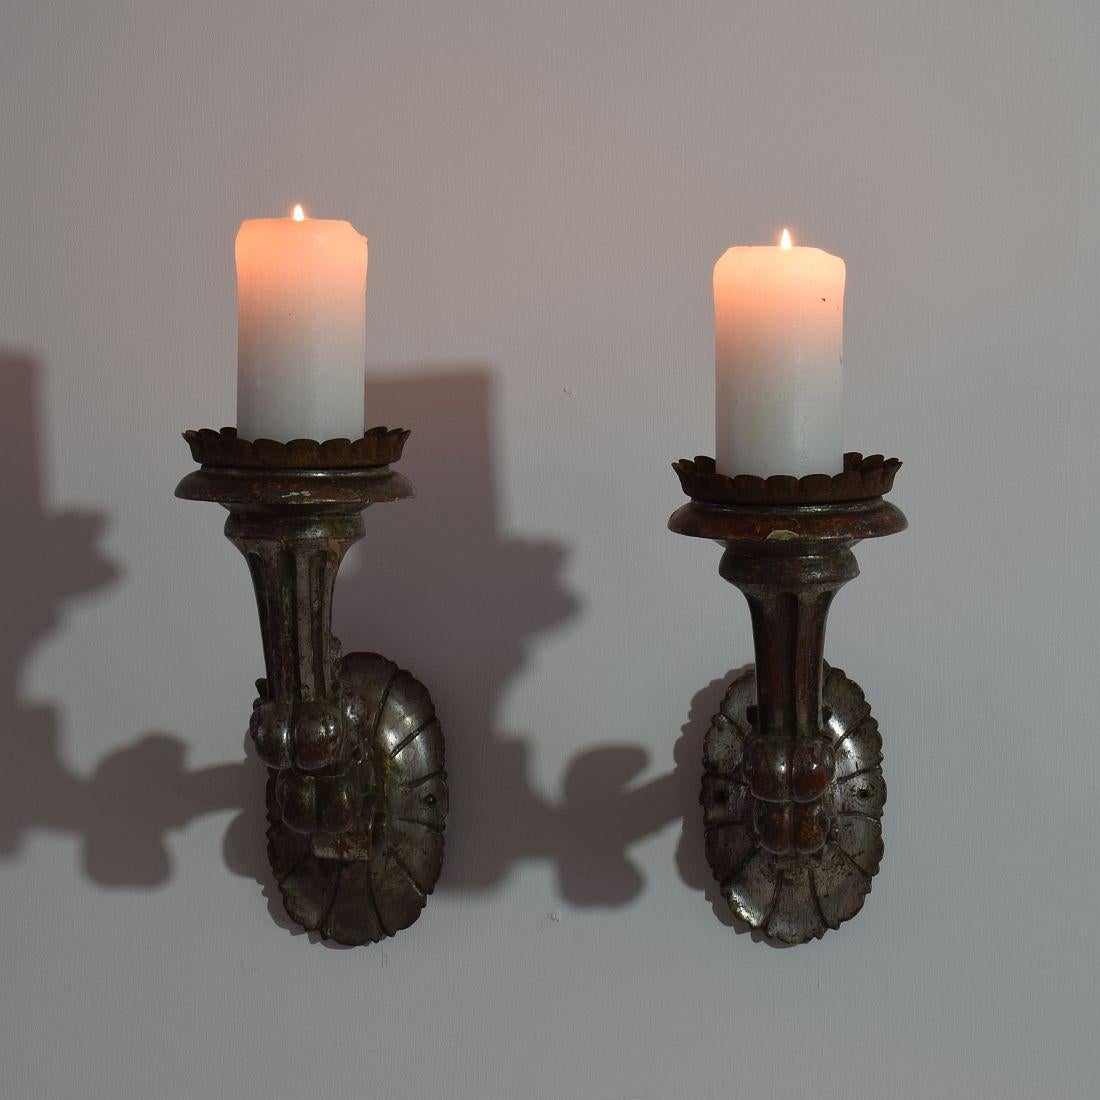 Hand-Carved Couple of Italian 19th Century Baroque Style Candleholders or Sconces